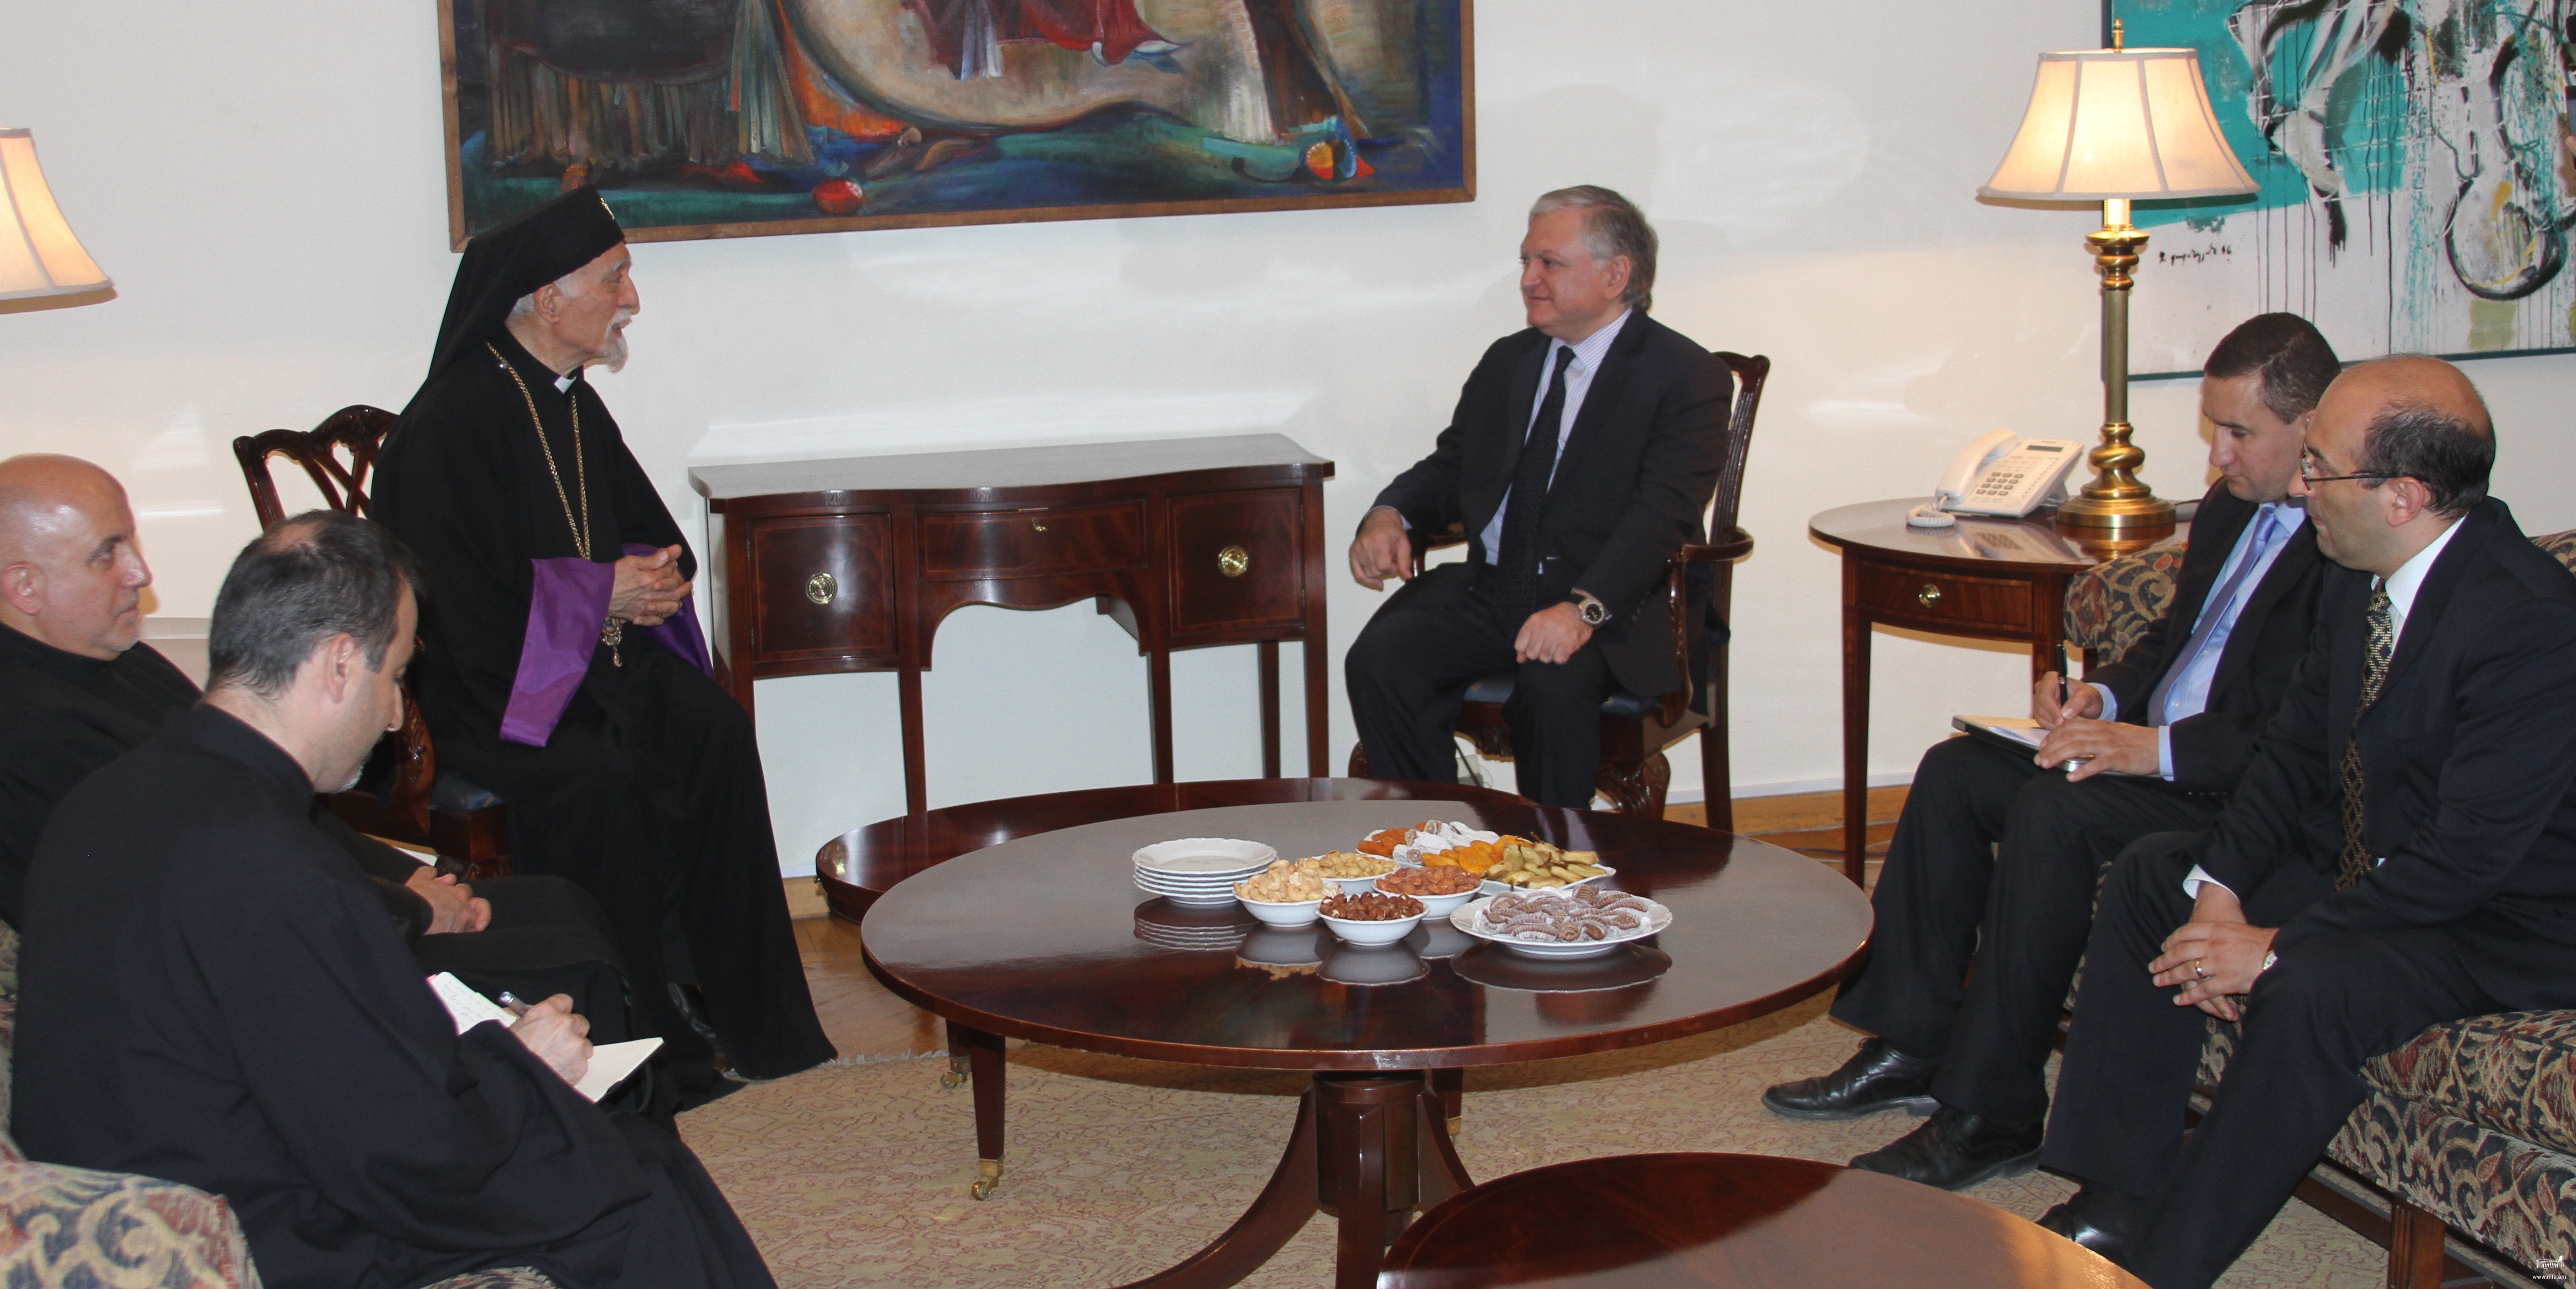 Minister of Foreign Affairs of Armenia met the Catholicos Patriarch of Cilicia of the Armenian Catholics